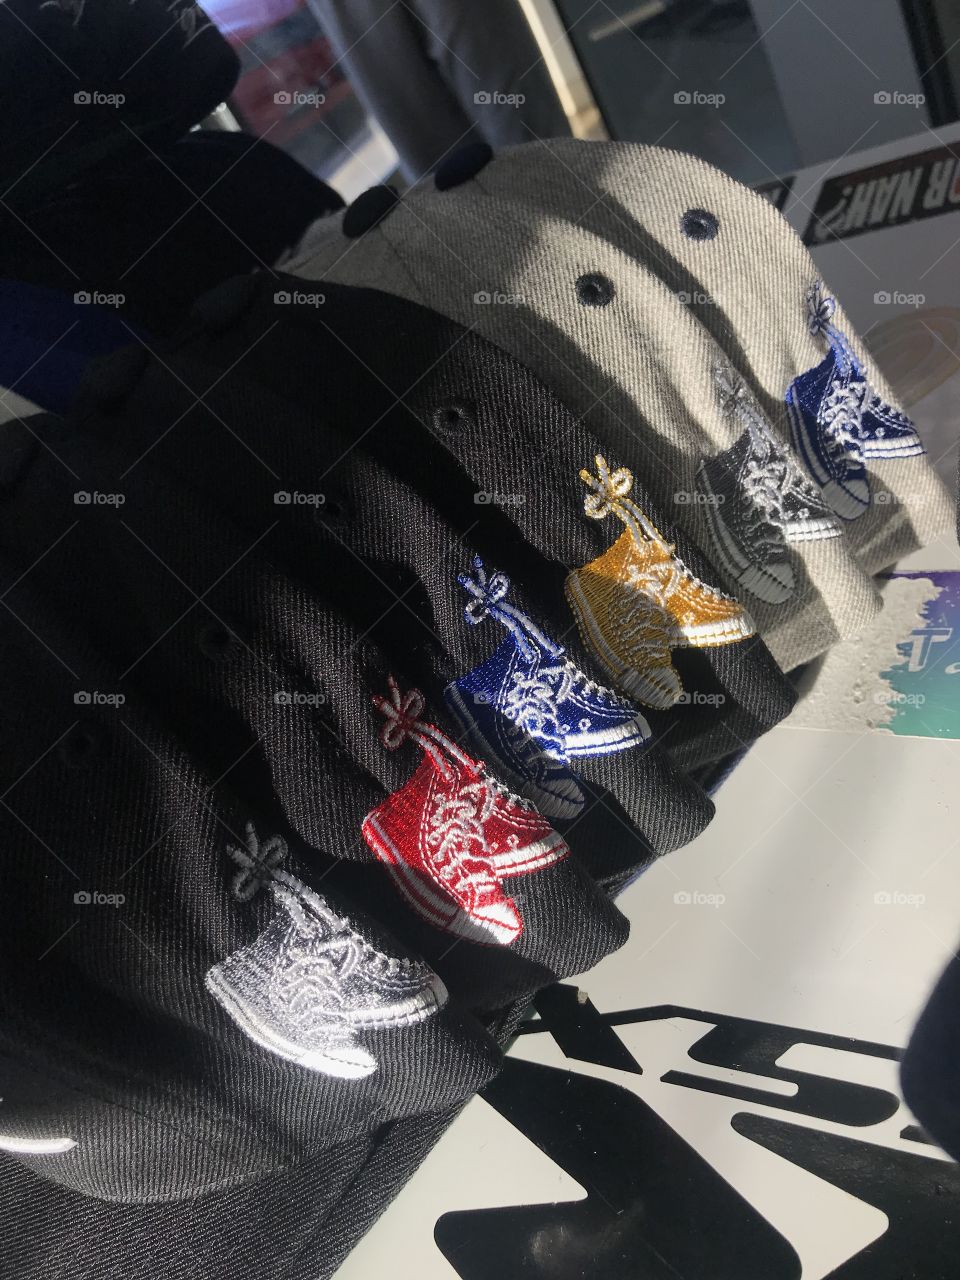 Different color shoes on hats